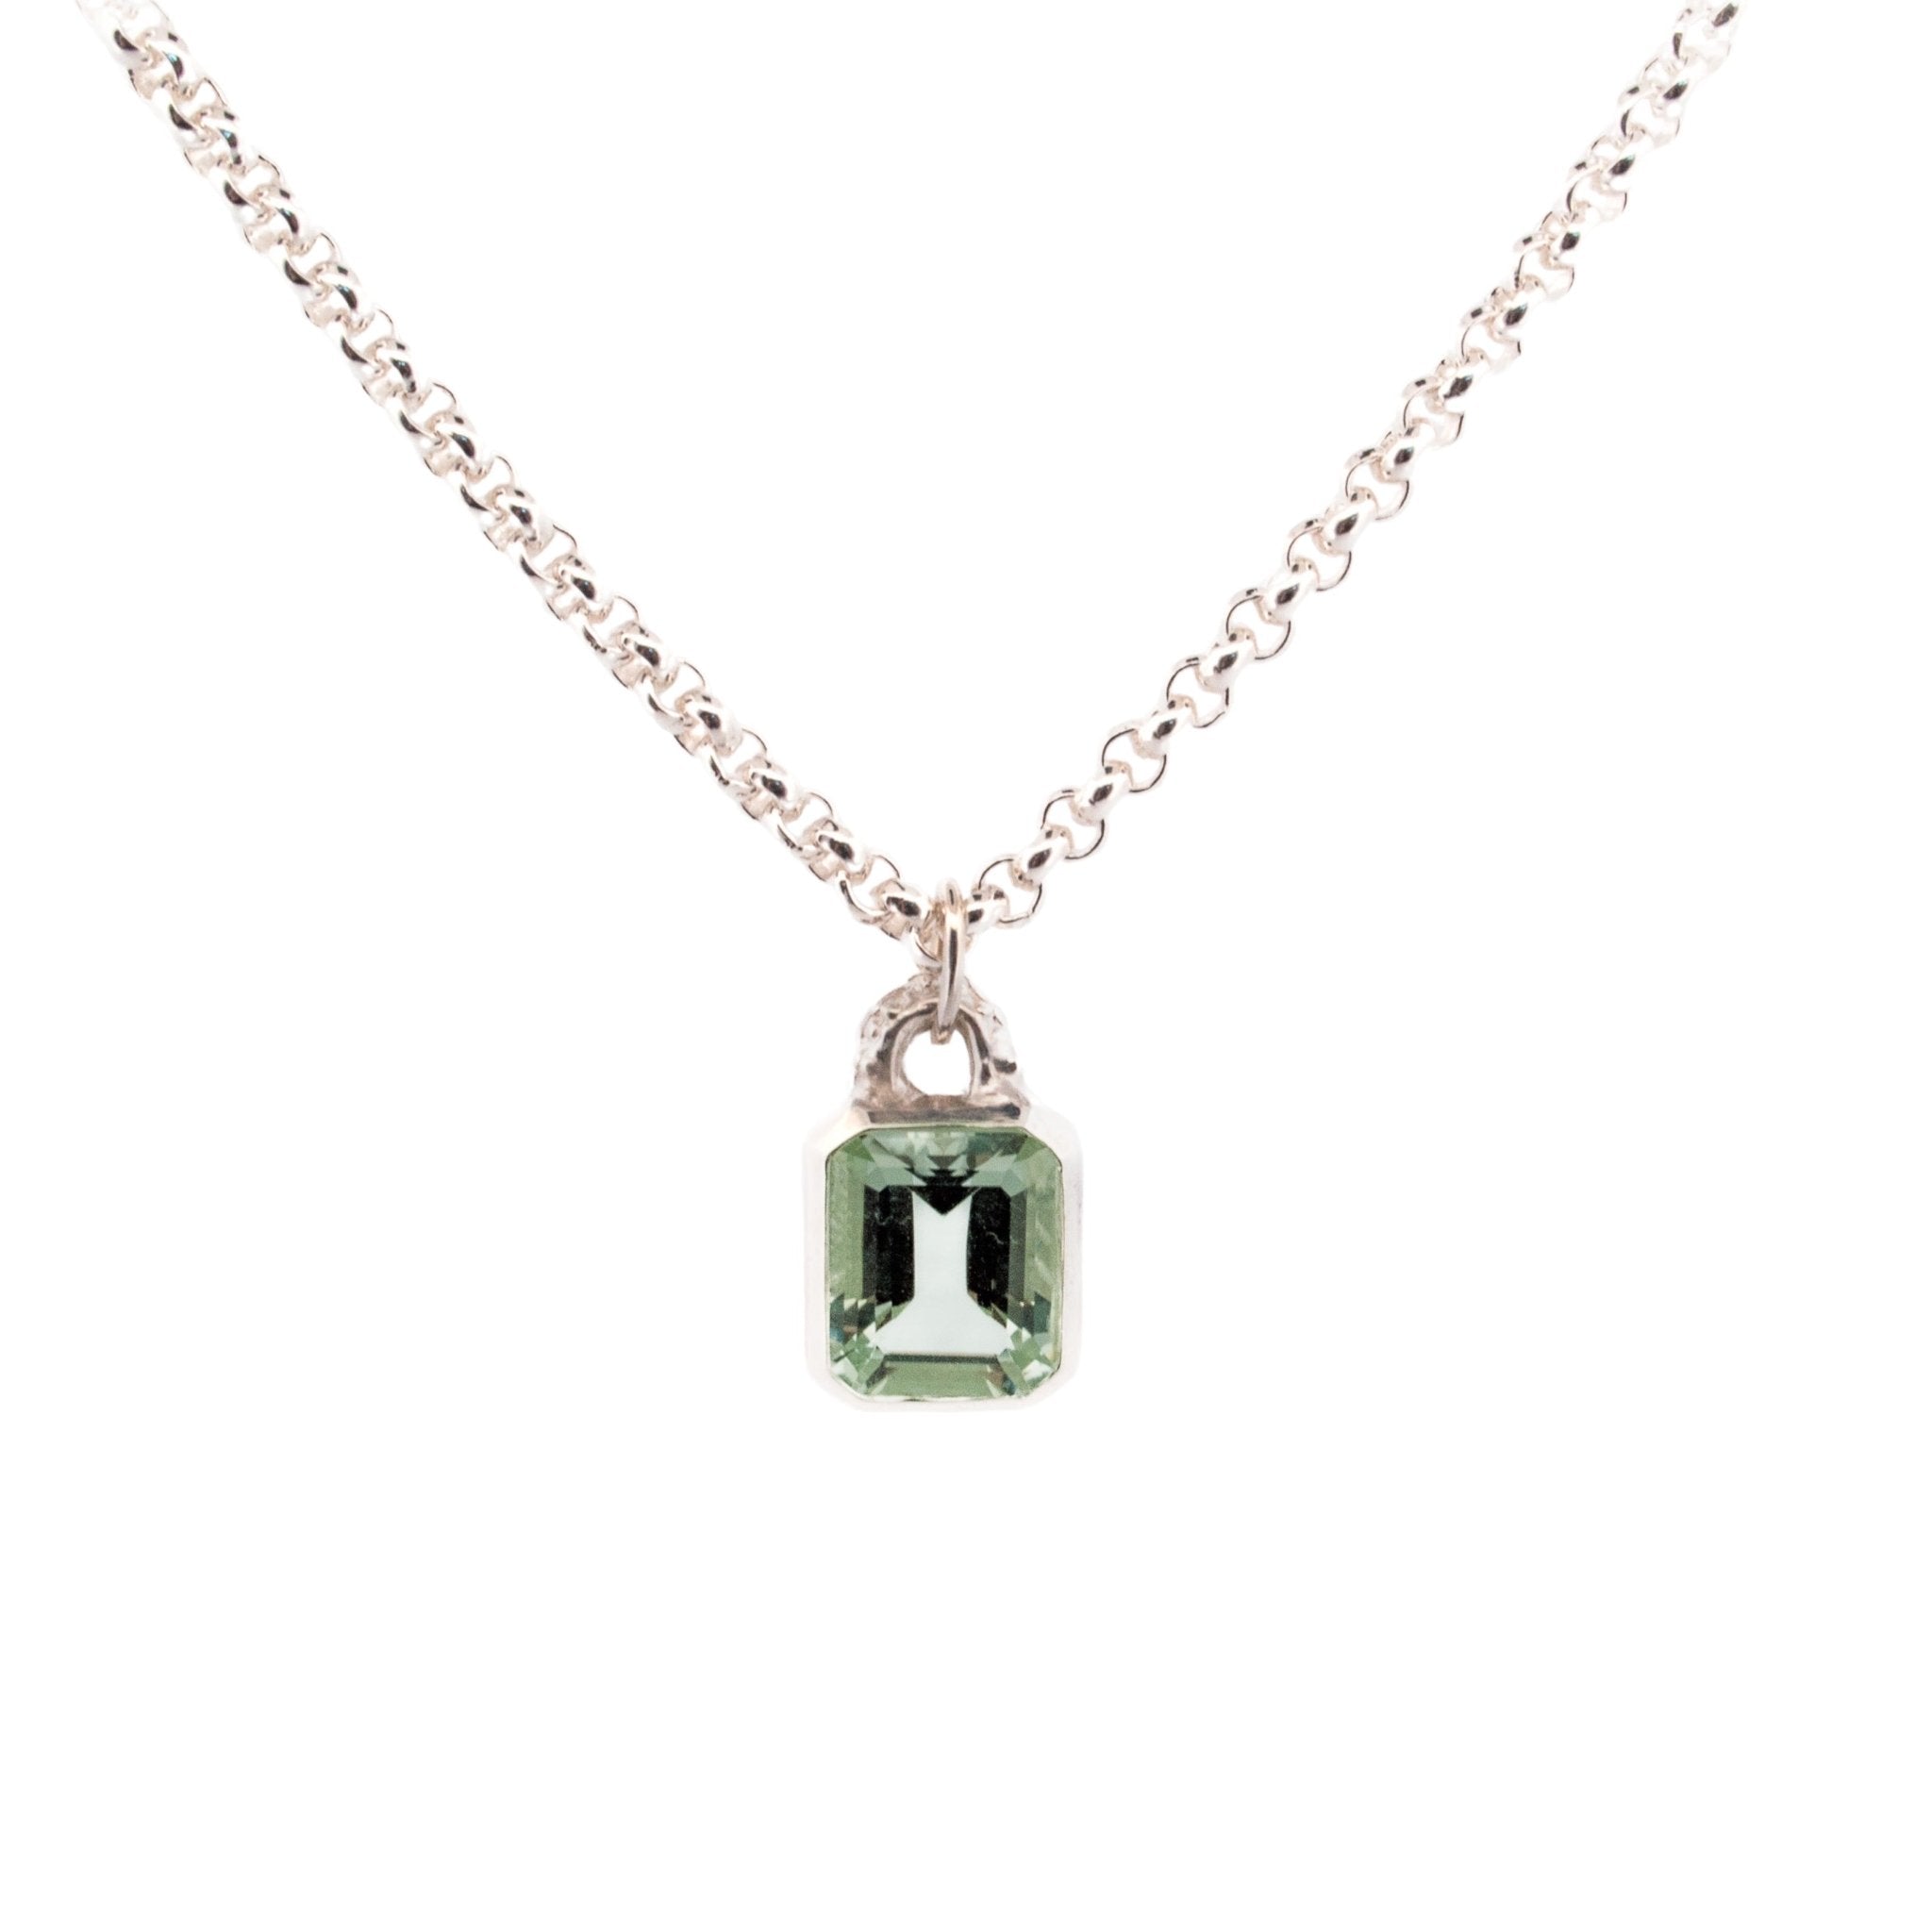 Maxi Silver Giselle Necklace - Dainty London